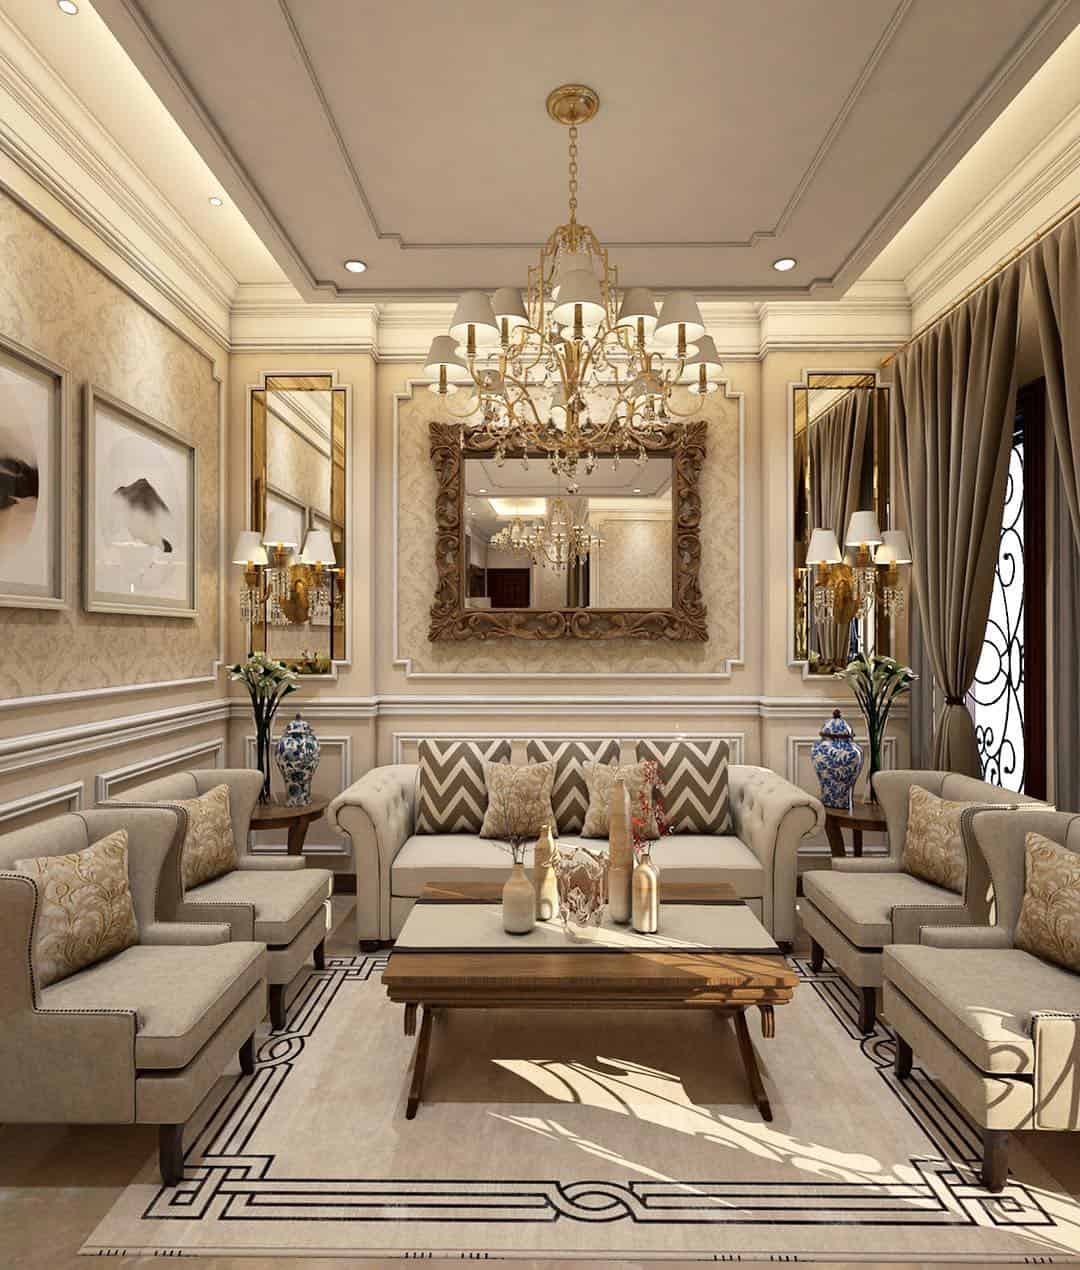 interior living room house trends 2021 furniture color decor chandeliers visit luxury inherited grandmother fashionable suit crystal even should they